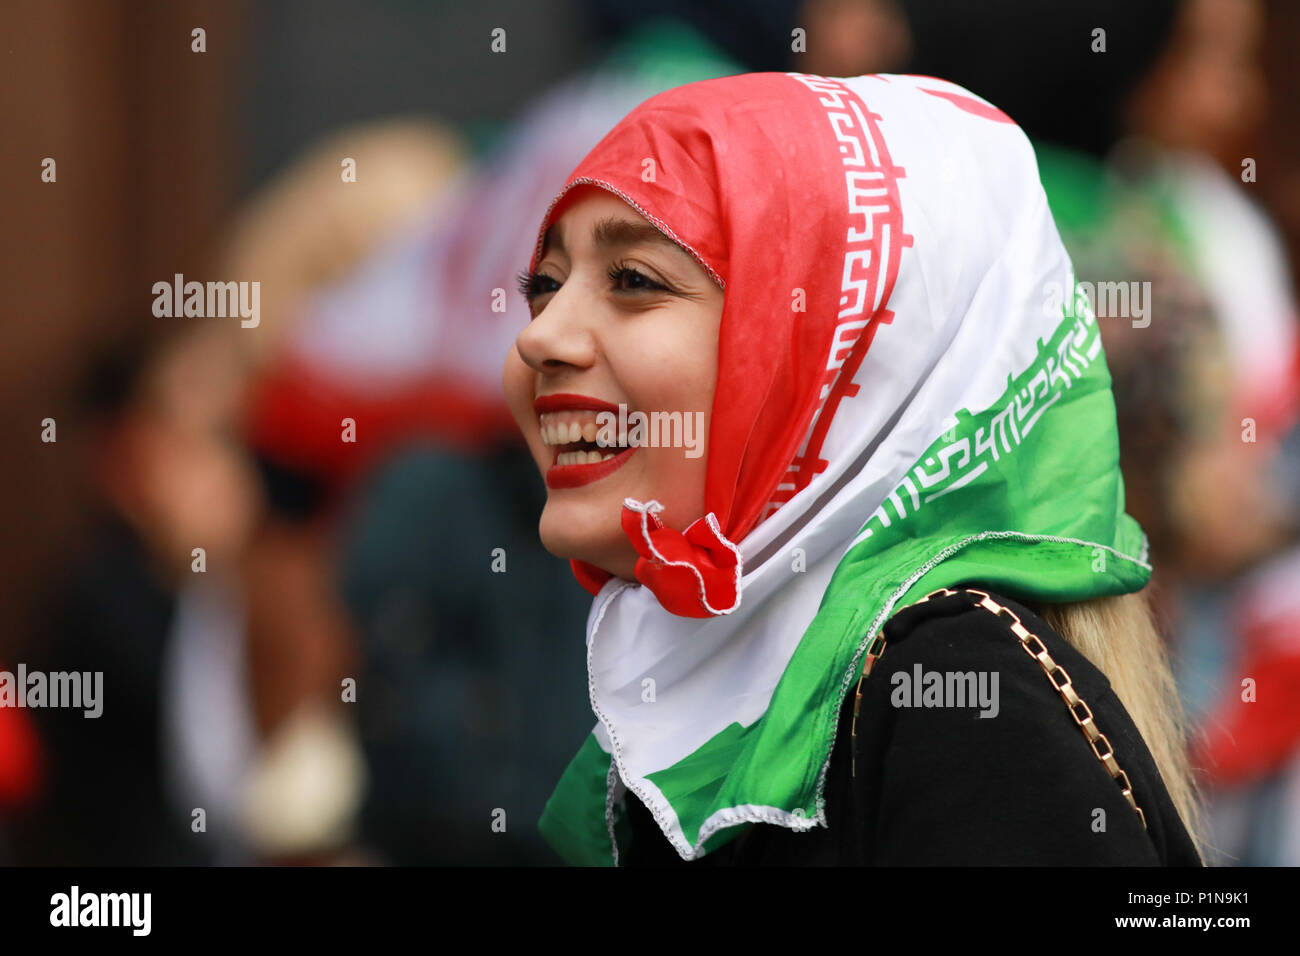 MOSCOU, MO - 12.06.2018: GENERAL PICTURES MOSCOW 2018 - Iranian fans fraternize in the Red Square region in Moscow. (Photo: Ricardo Moreira/Fotoarena) Stock Photo